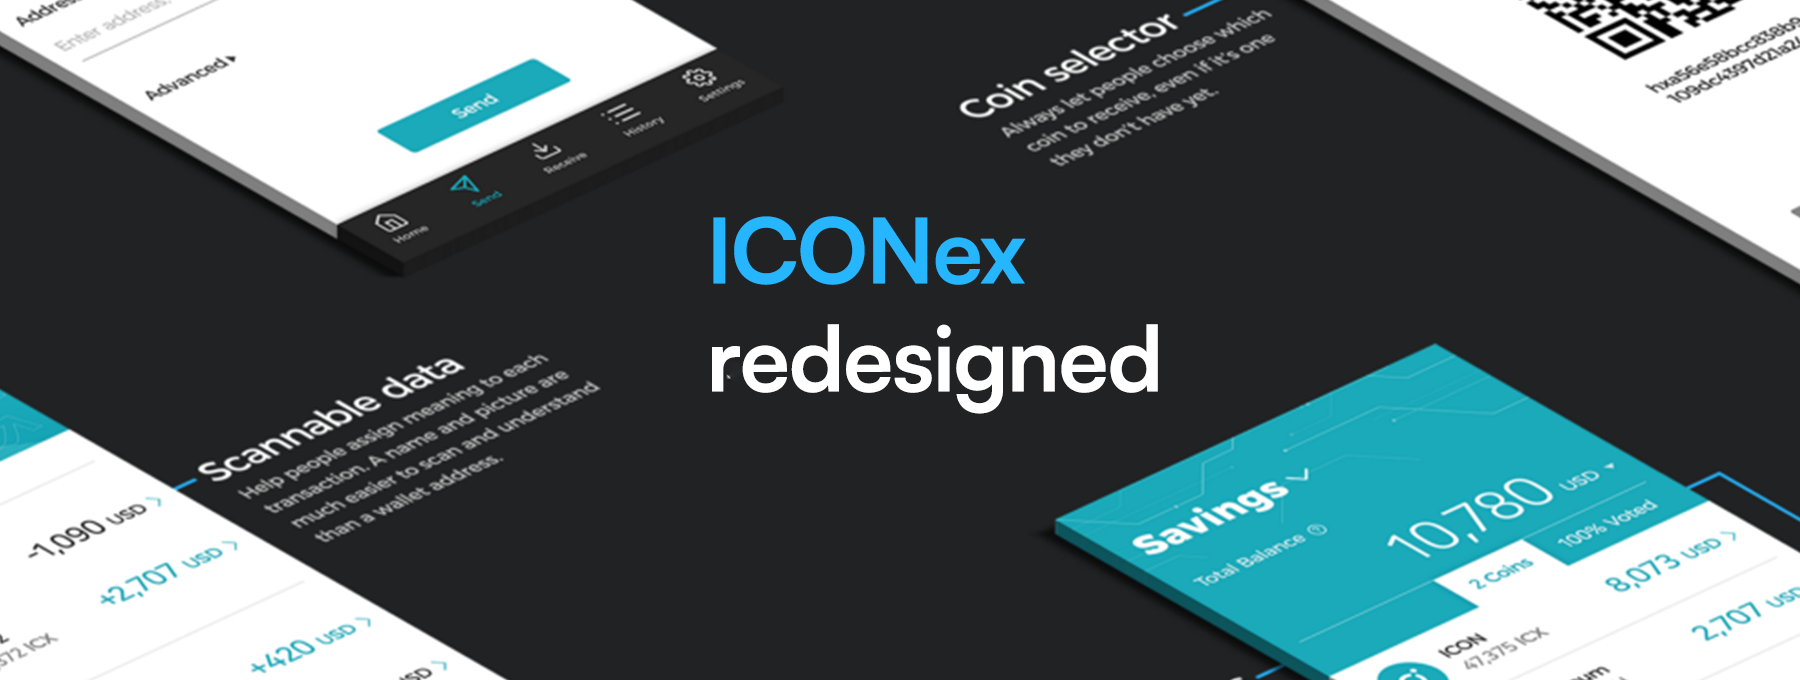 The ICONex wallet is preventing adoption. Here’s how to fix it.